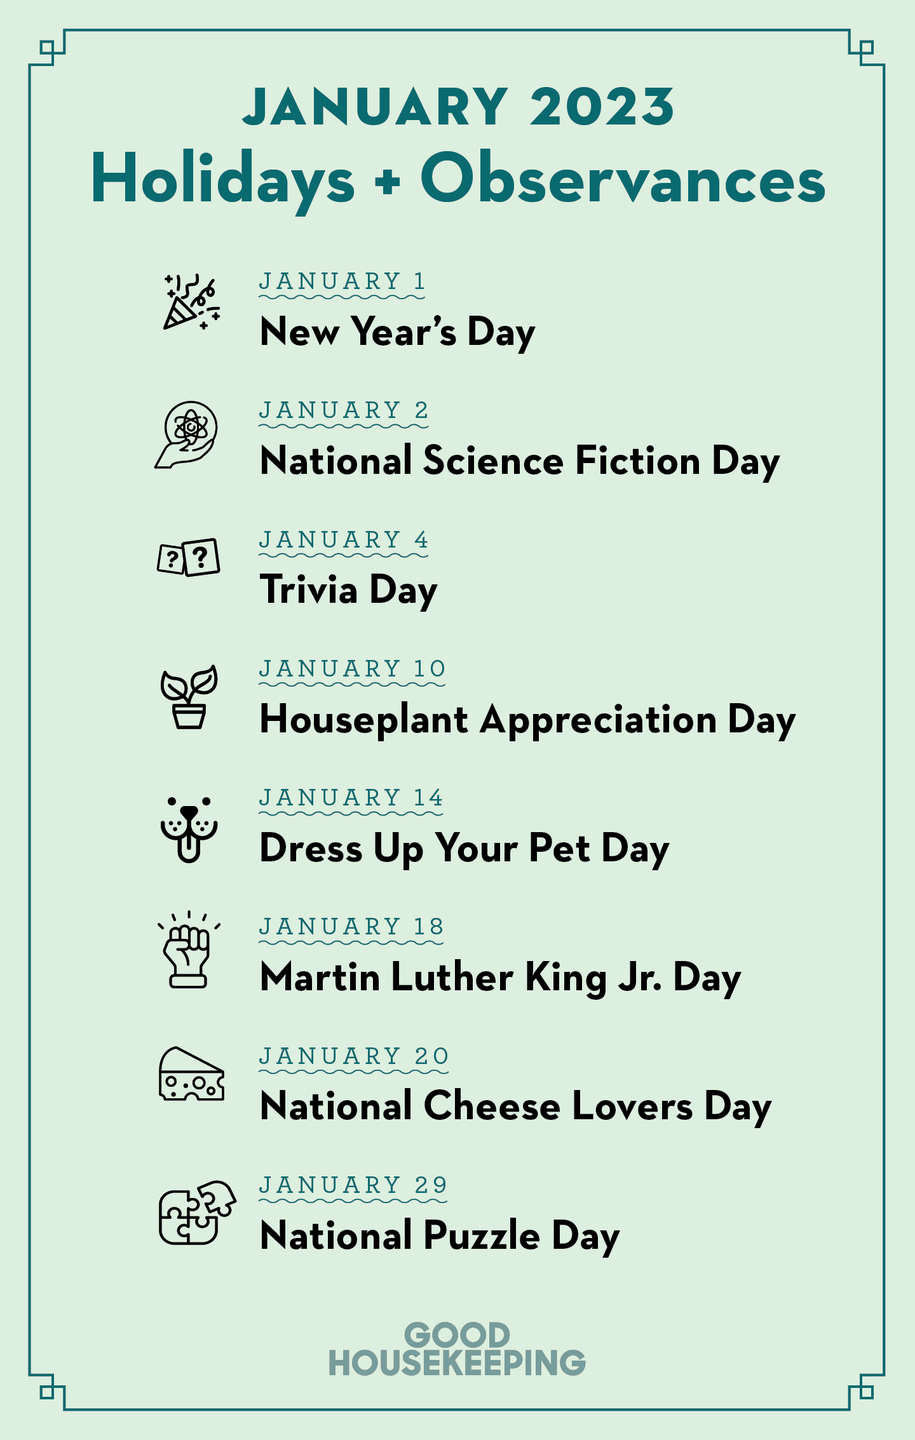 Your Guide to All January Holidays and Observances